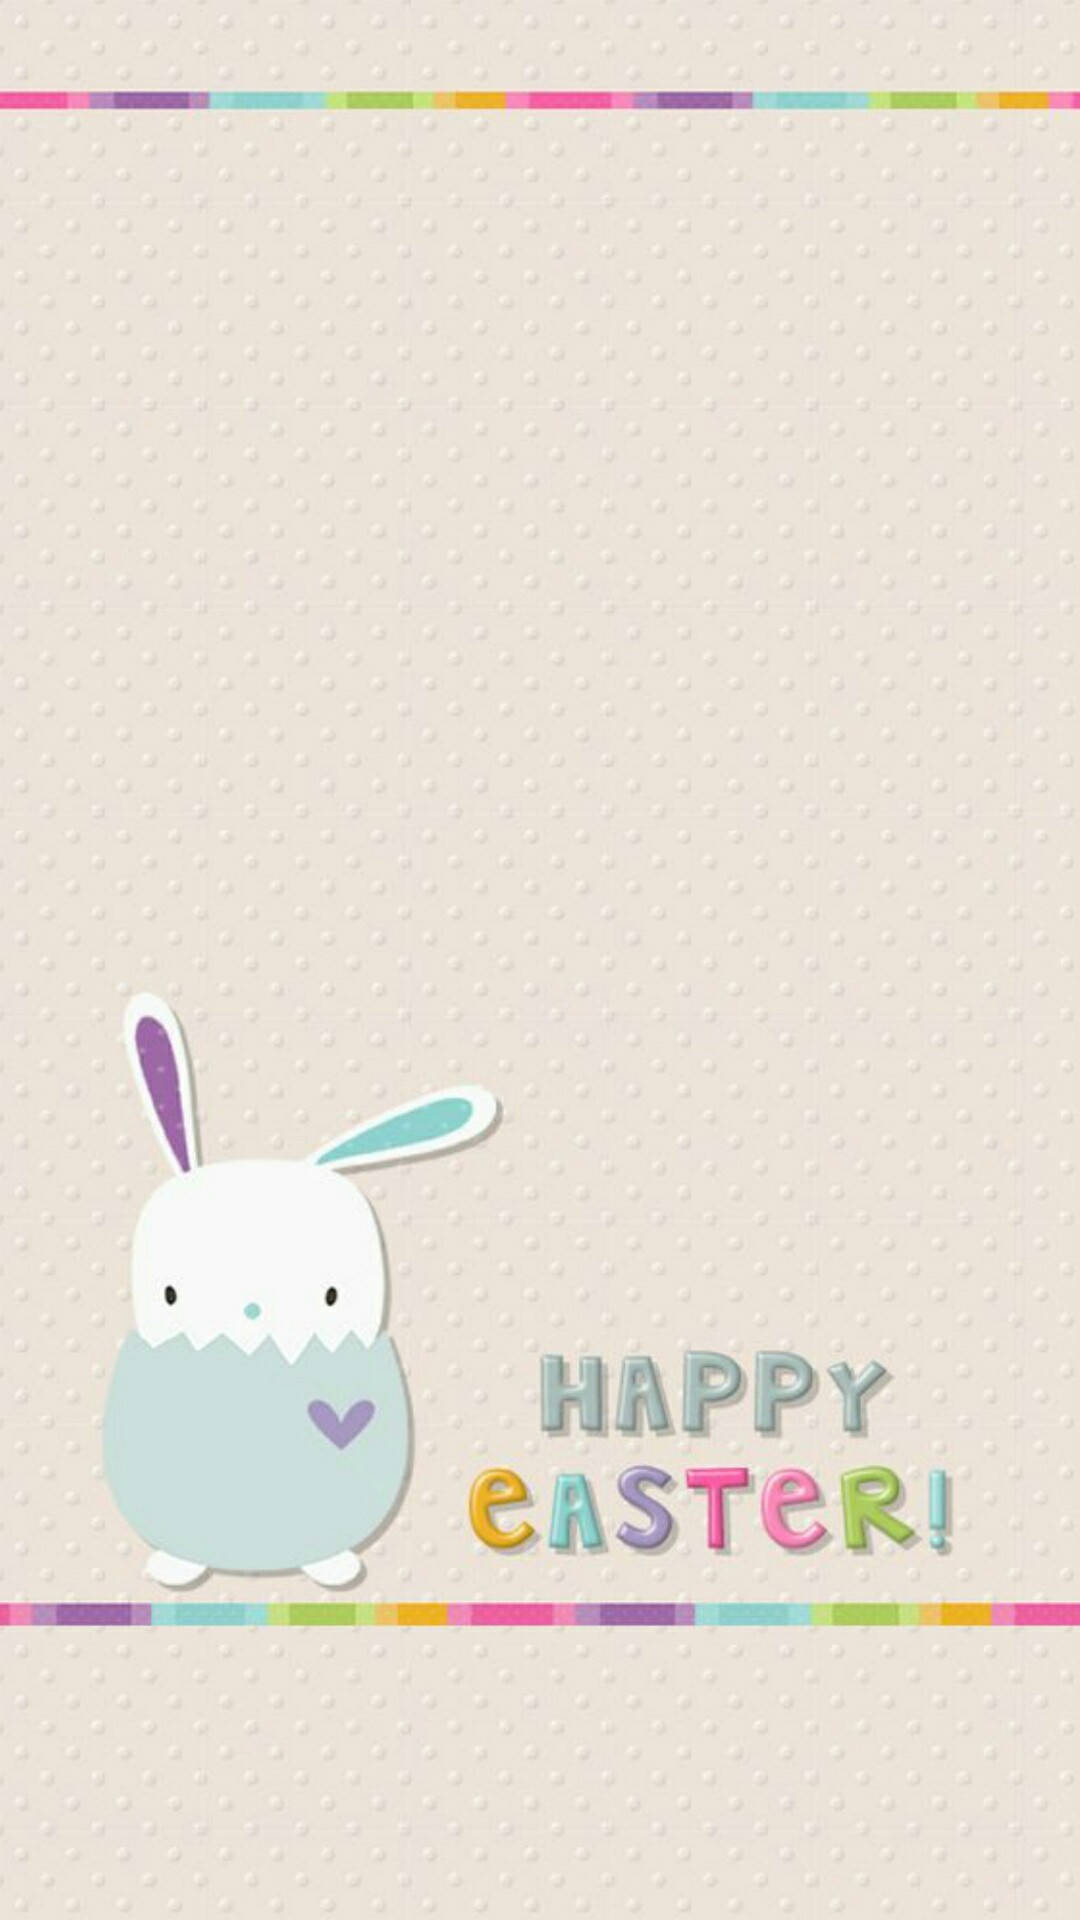 Get in the Holiday Spirit With This Easter-Themed iPhone Wallpaper